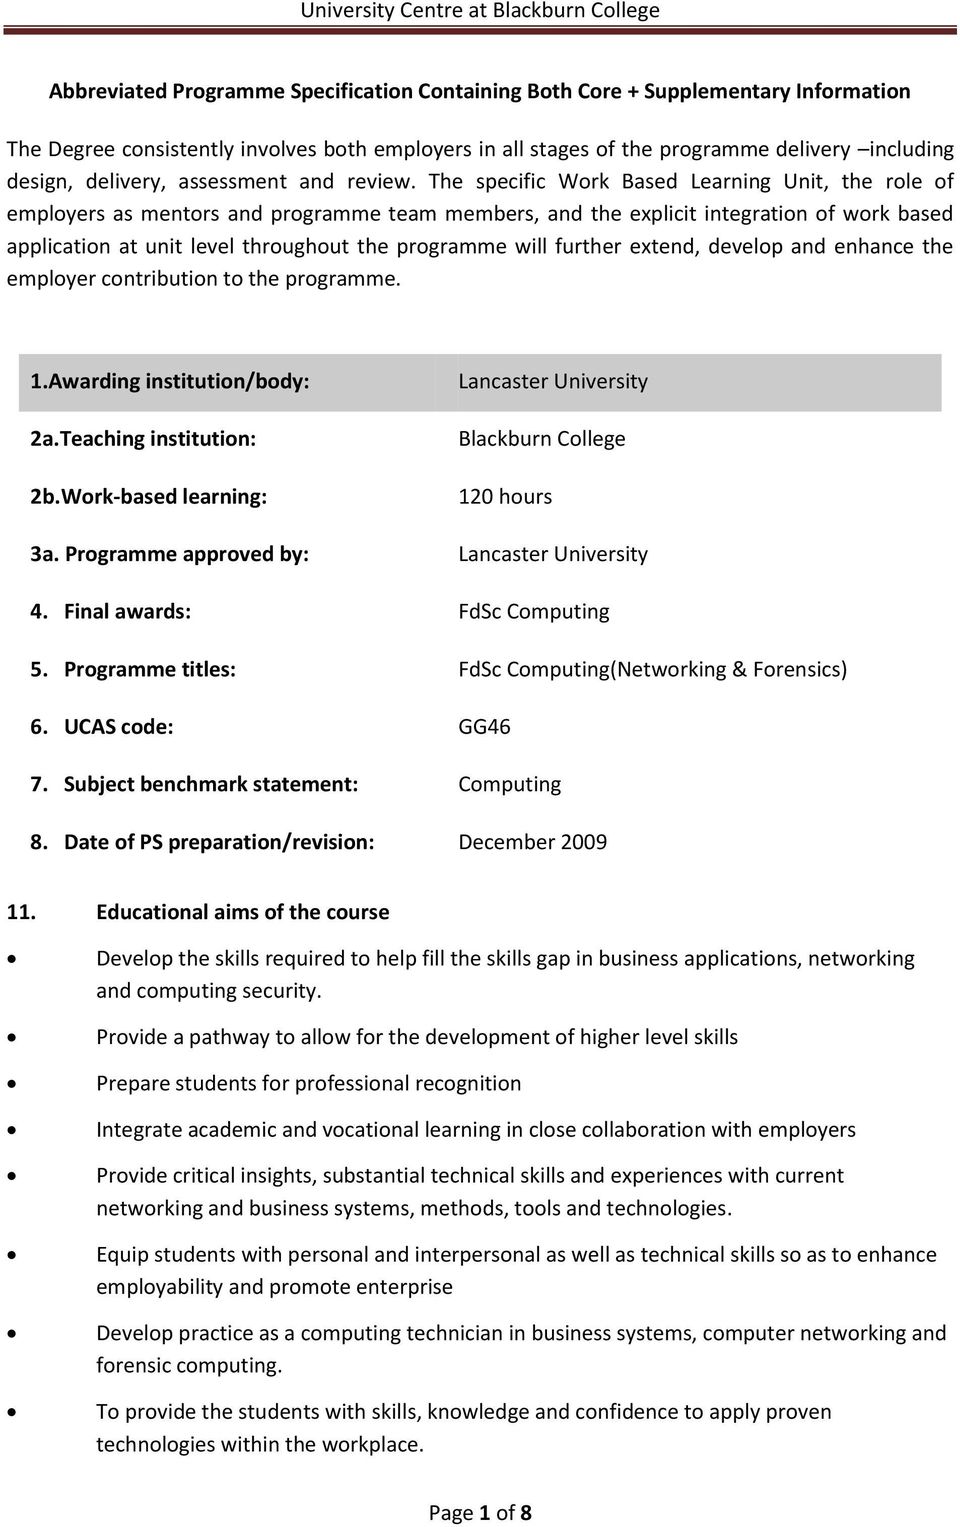 The specific Work Based Learning Unit, the role of employers as mentors and programme team members, and the explicit integration of work based application at unit level throughout the programme will